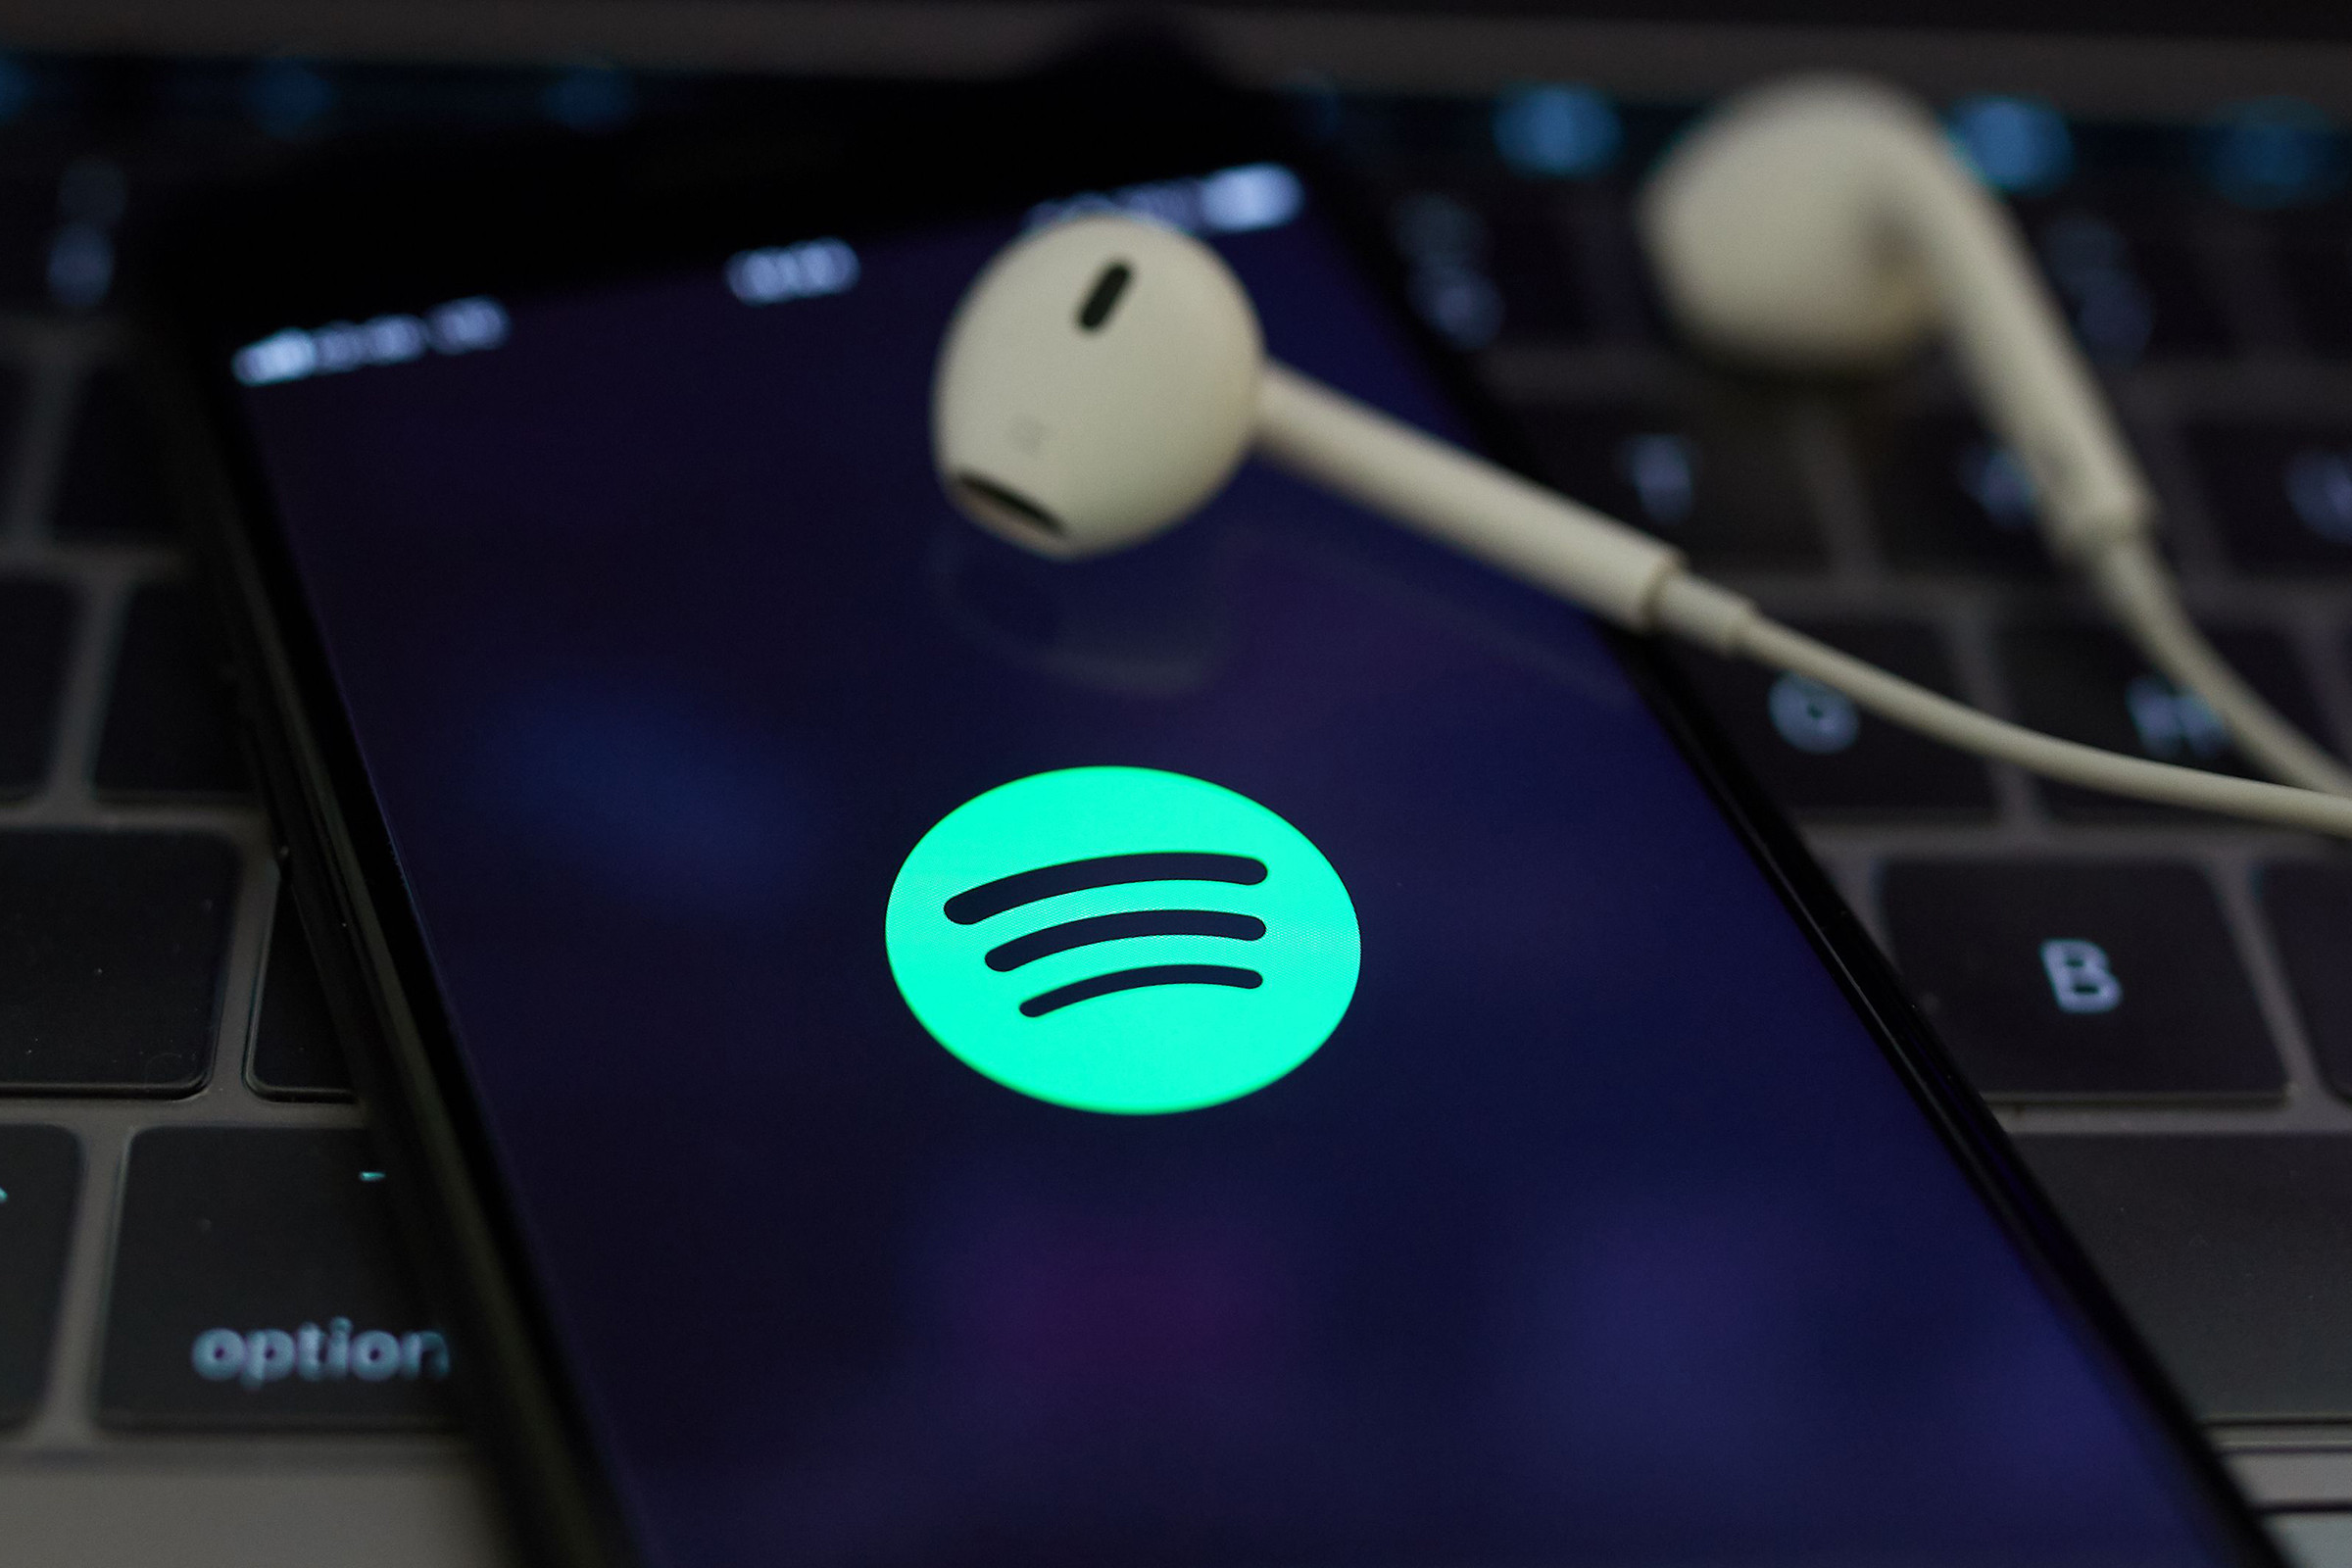 Upcoming IPO of the world's largest music subscription service Spotify, Berlin, Germany - 24 Feb 2018